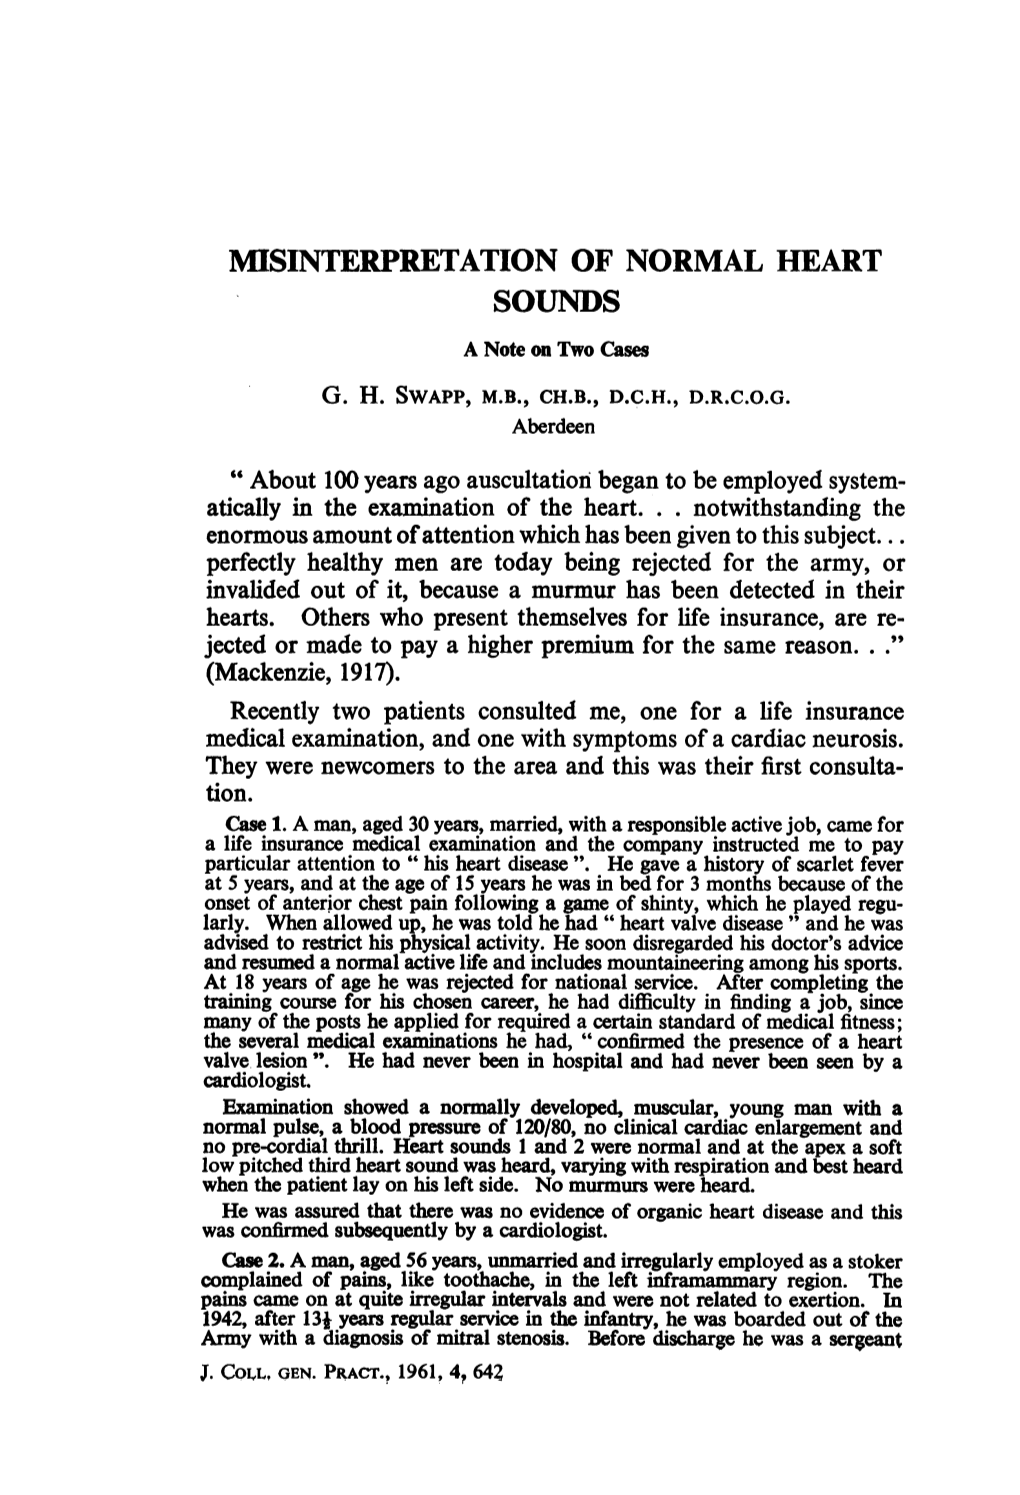 MISINTERPRETATION of NORMAL HEART SOUNDS a Note on Two Cases G